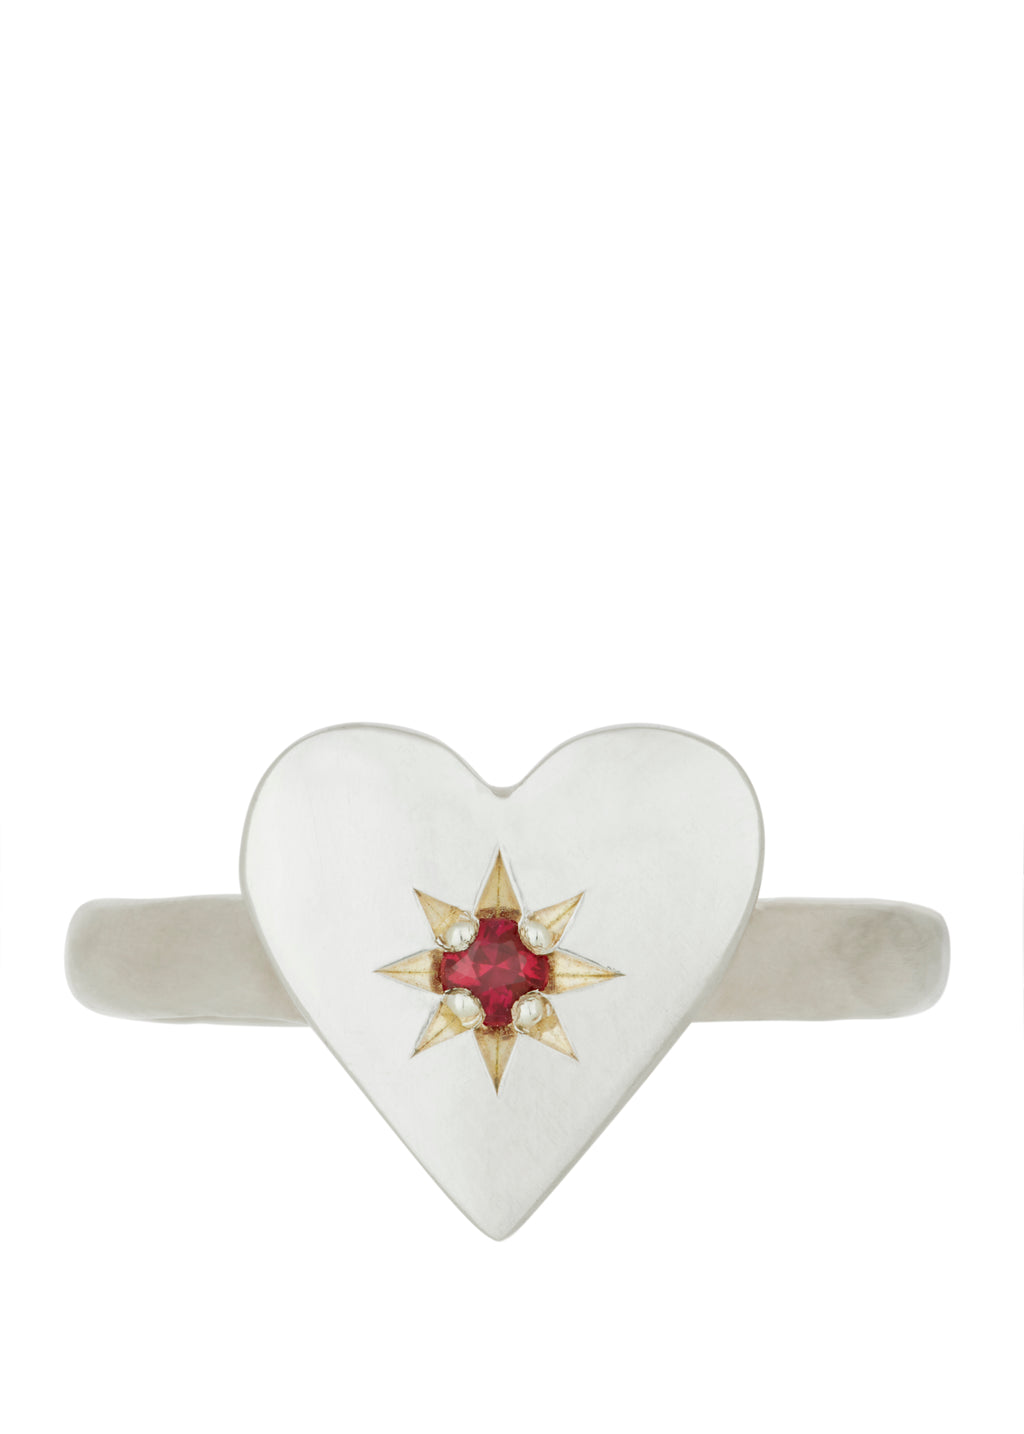 Heart Ring with Star Setting in 14k White Gold